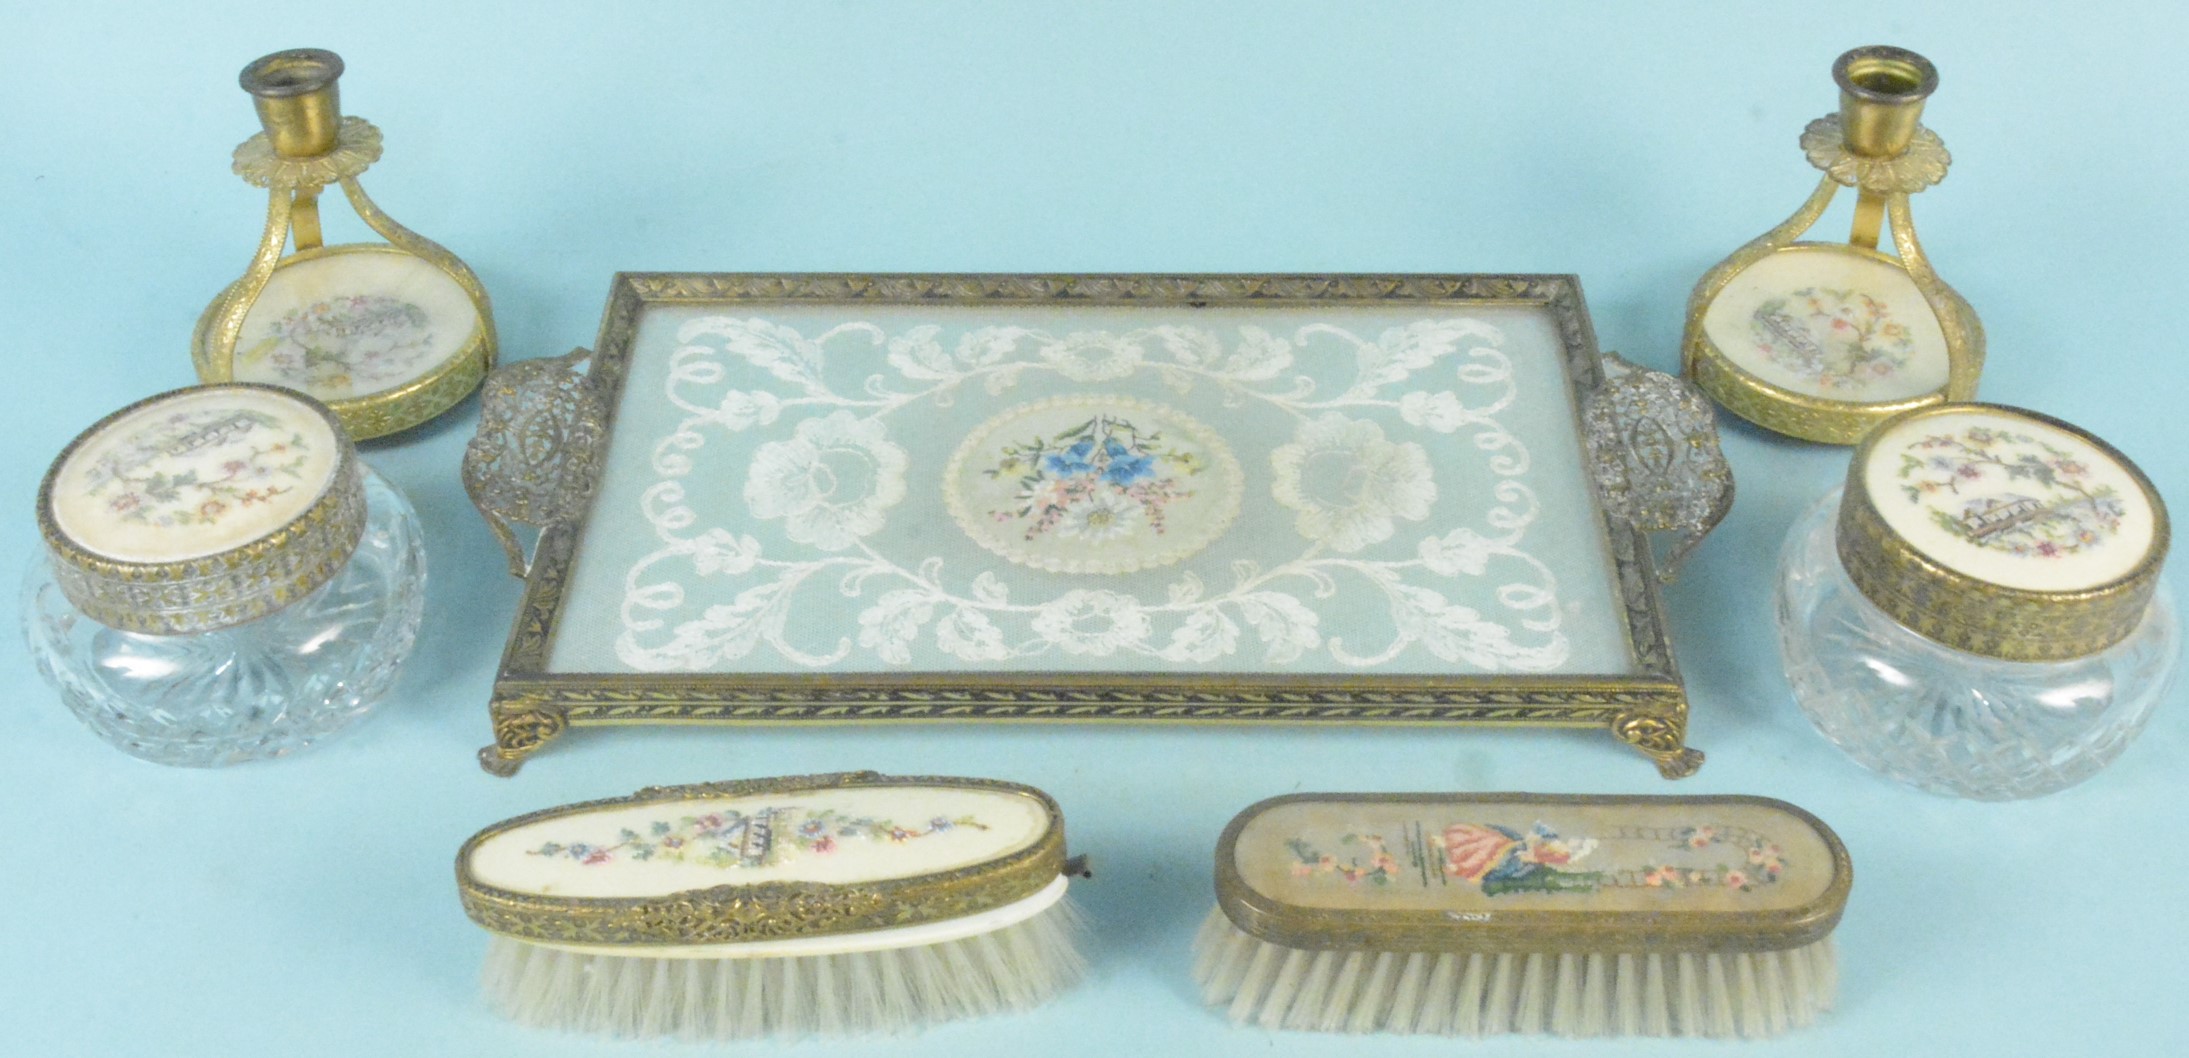 A vintage lace inlaid dressing table set with cut glass powder pots with embroidered inserts (as